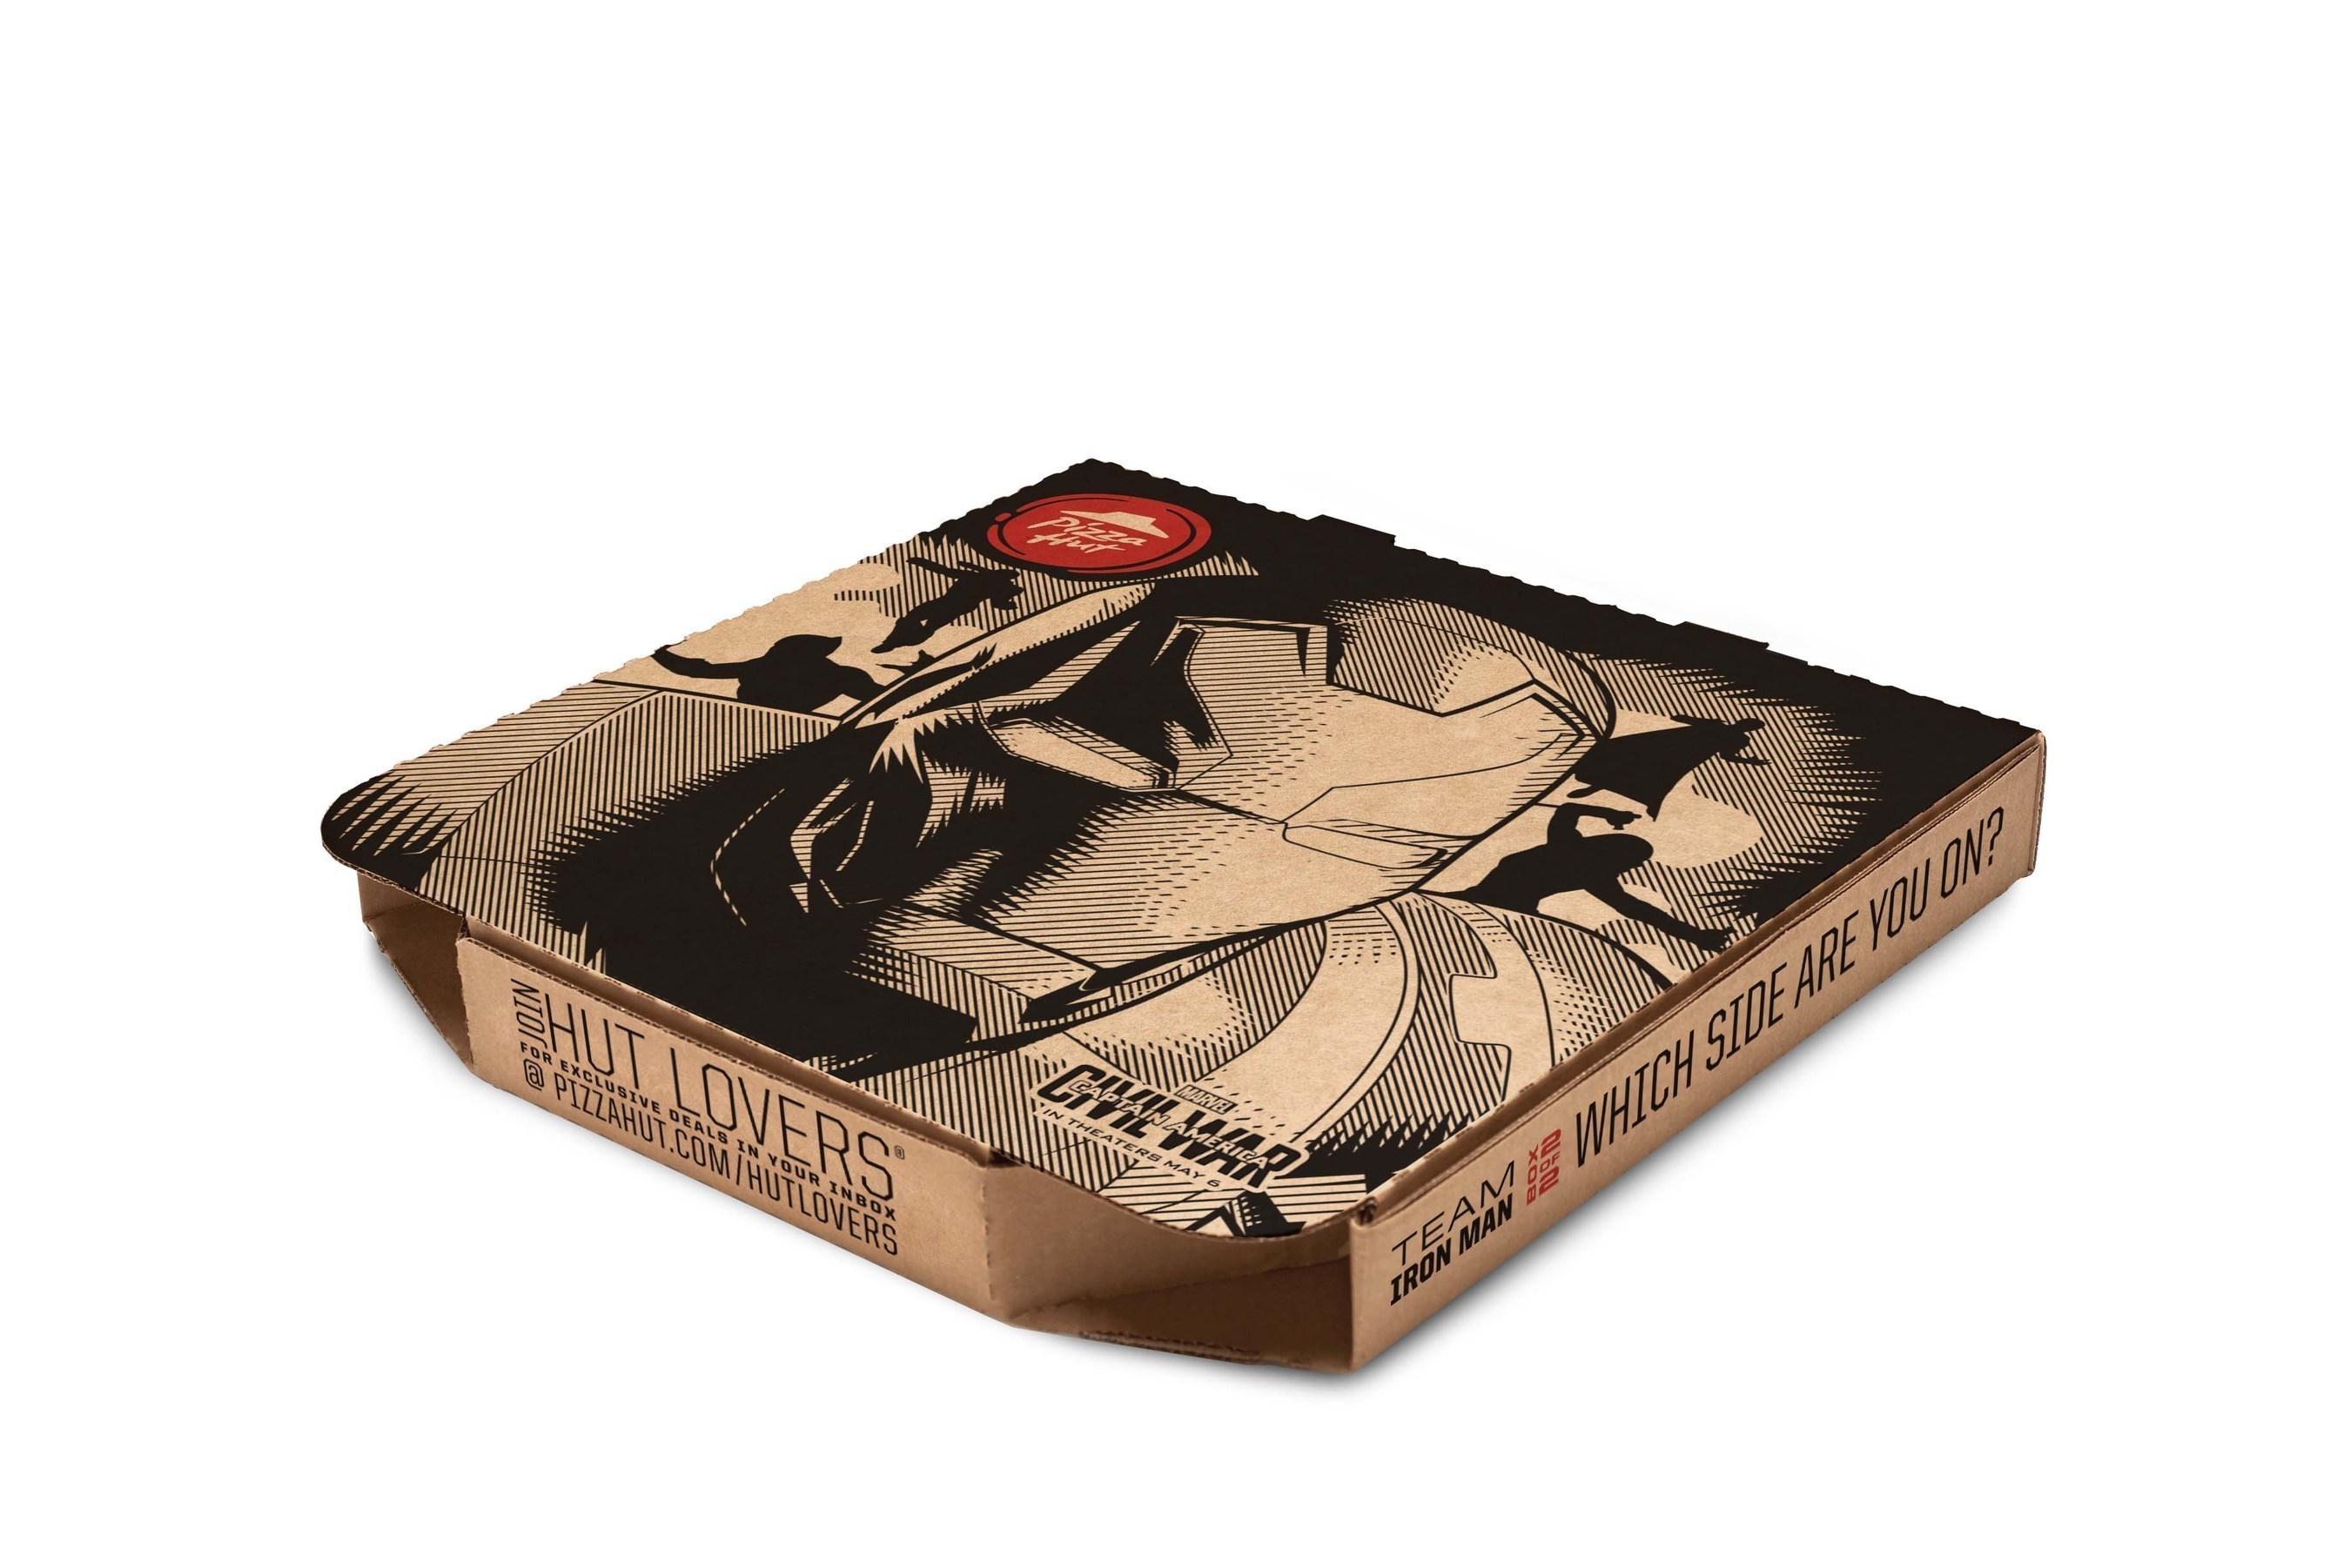 As part of its new partnership with Marvel's "Captain America: Civil War" Pizza Hut reveals set of Captain America & Iron Man pizza boxes, all-new Stuffed Garlic Knots $5 Flavor Menu item, and first-ever post-online ordering entertainment platform at www.PizzaHut.com/CaptainAmerica.